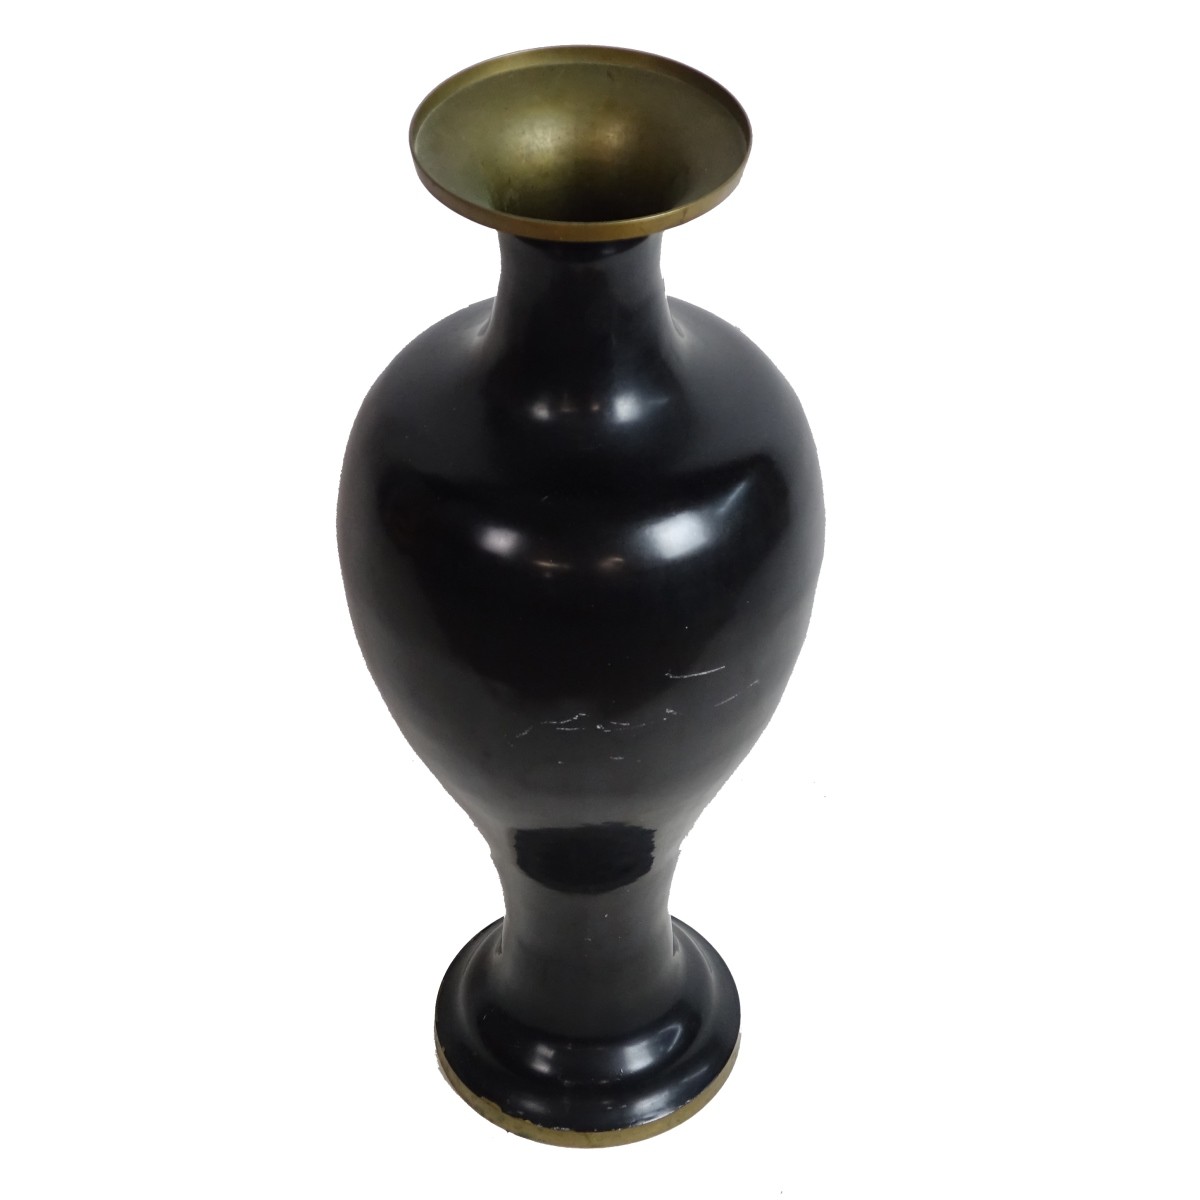 Japanese Black Lacquer and MOP Inlaid Vase